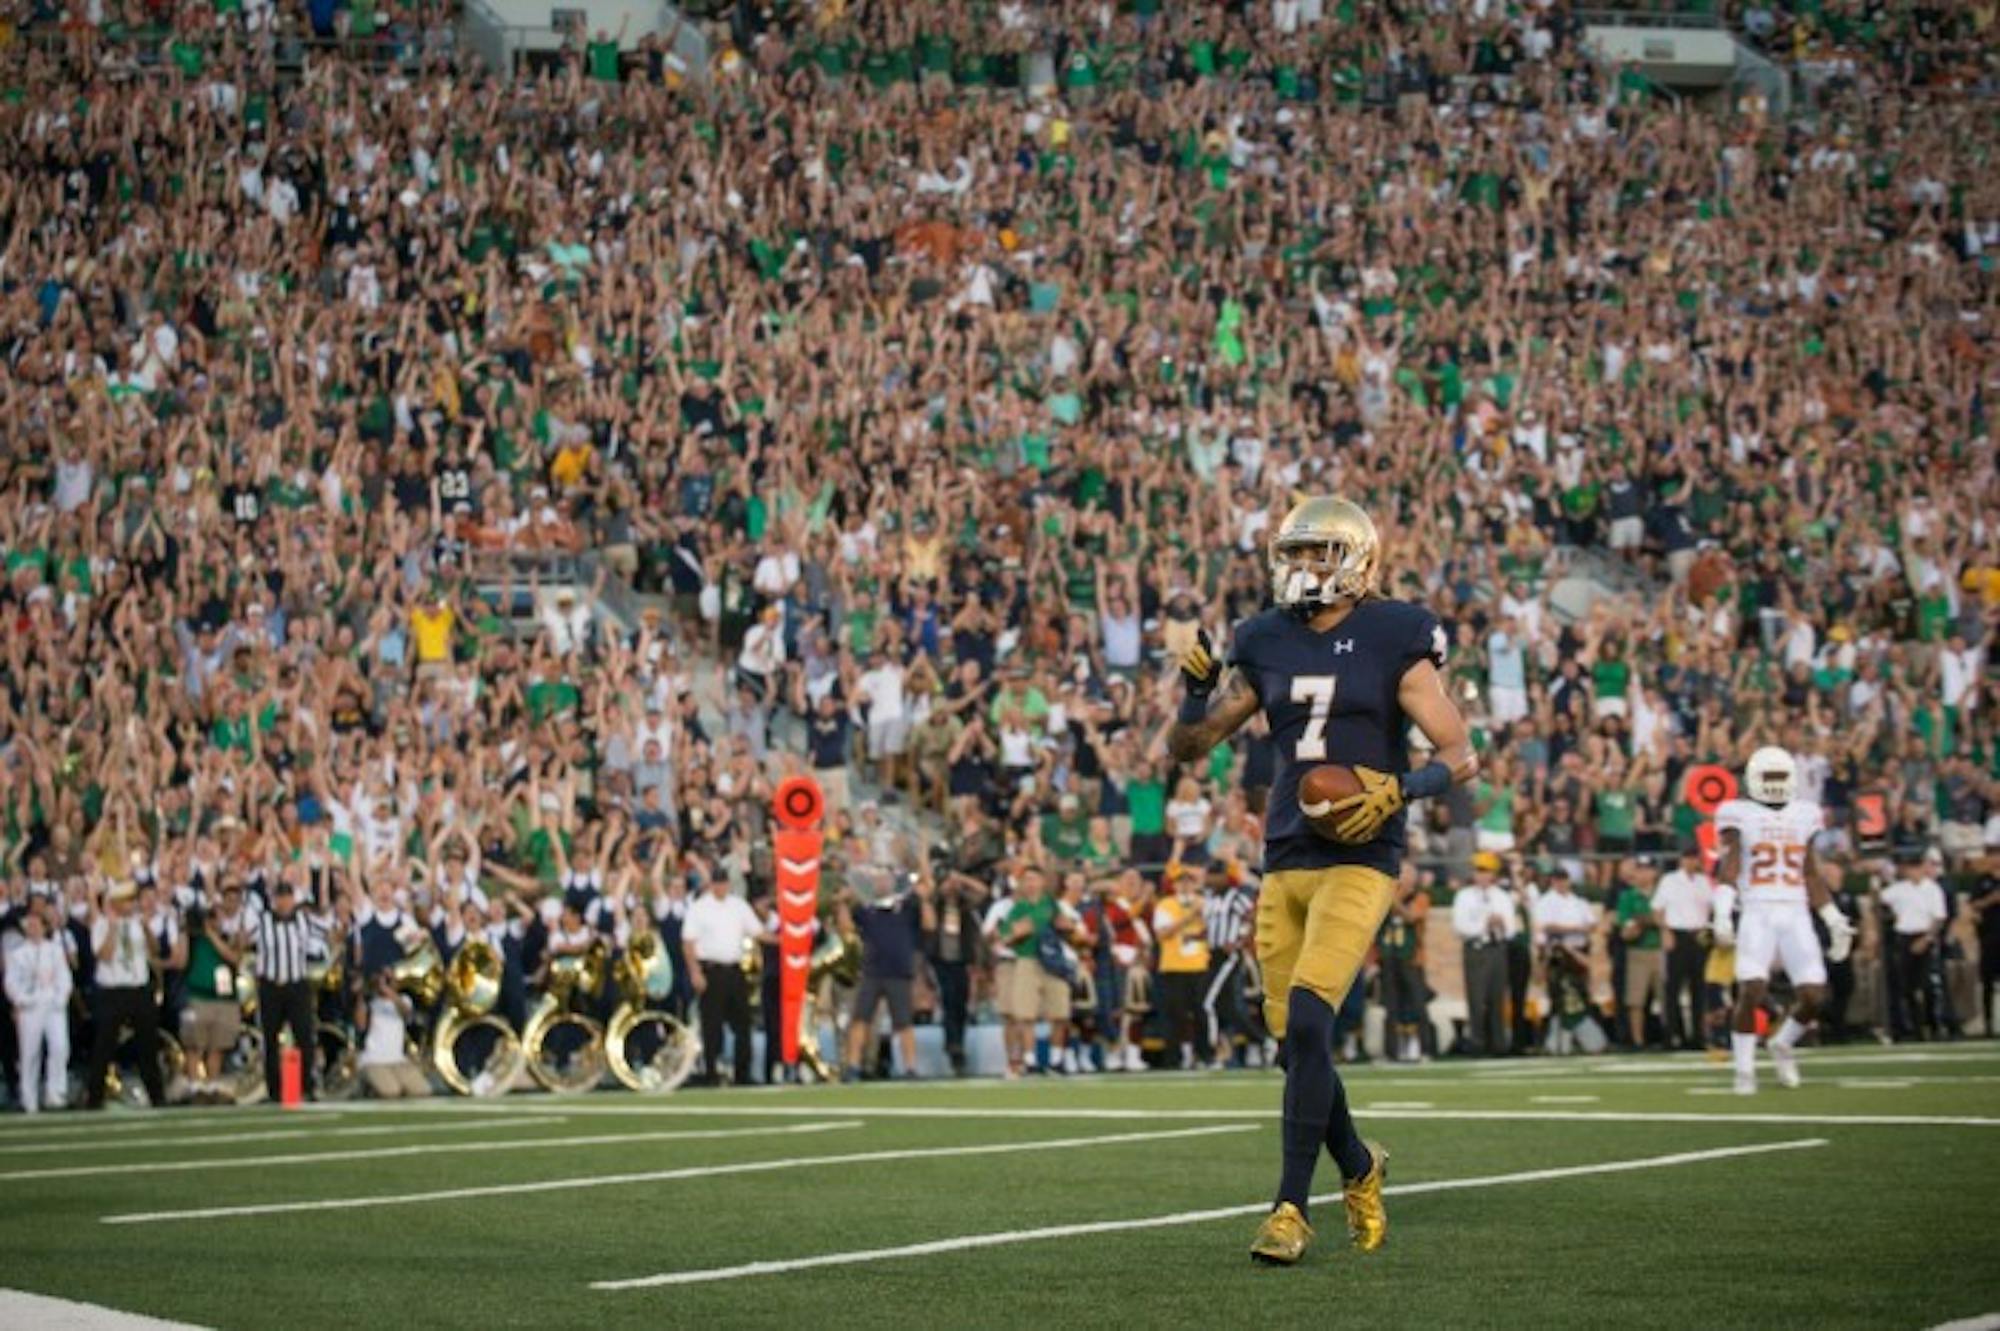 Former Irish receiver Will Fuller gets ready to celebrate after a touchdown pass during Notre Dame's 38-3 victory over Texas on Sept. 5 at Notre Dame Stadium.